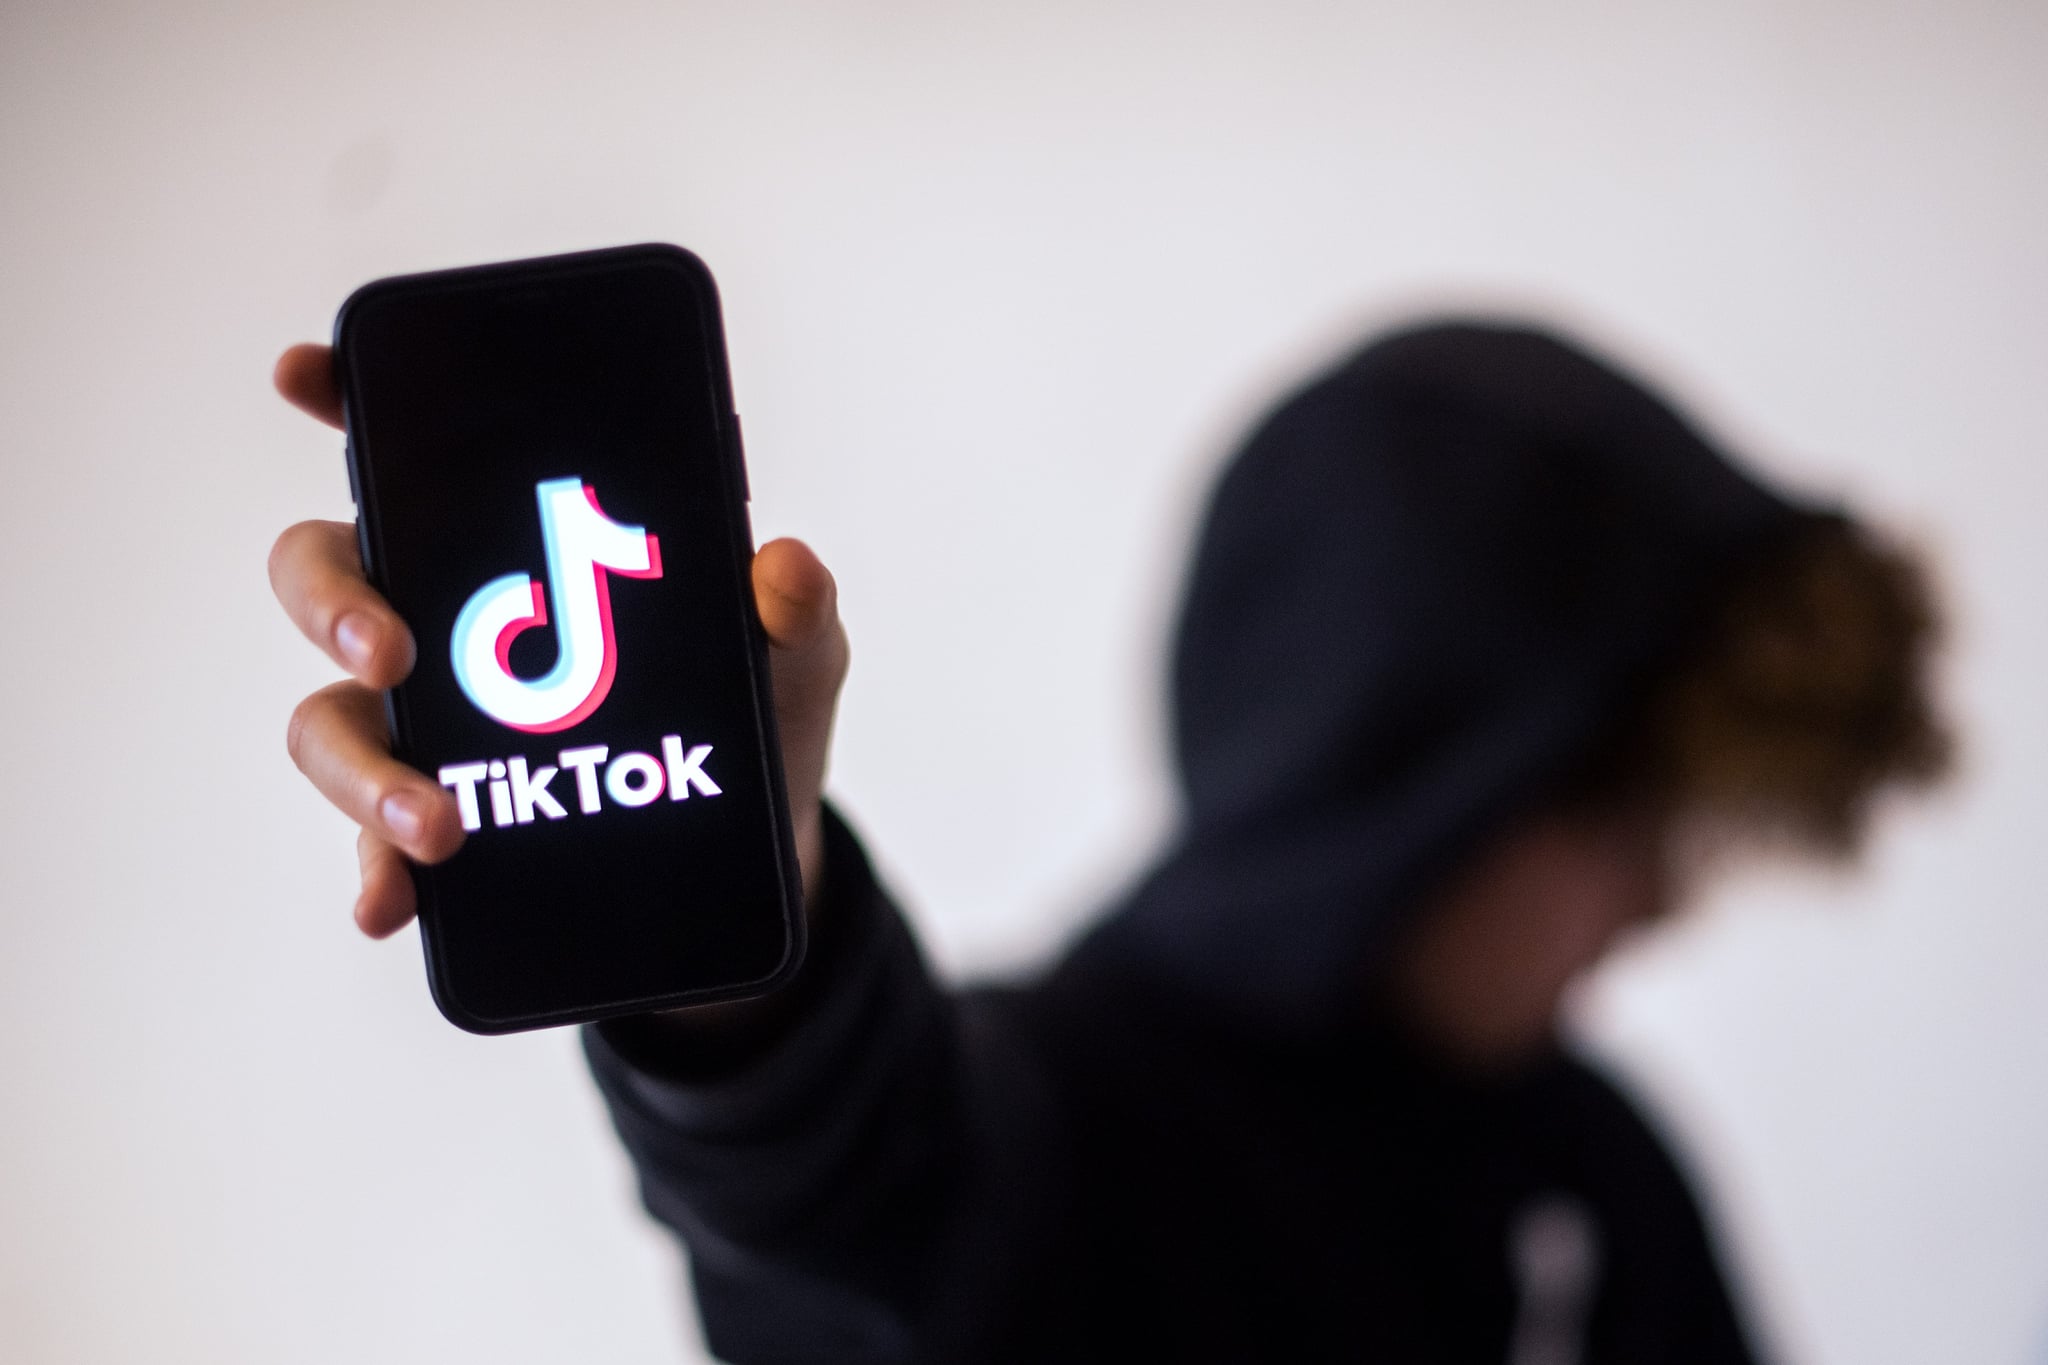 A teenager presents a smartphone with the logo of Chinese social network Tik Tok, on January 21, 2021 in Nantes, western France. (Photo by LOIC VENANCE / AFP) (Photo by LOIC VENANCE/AFP via Getty Images)